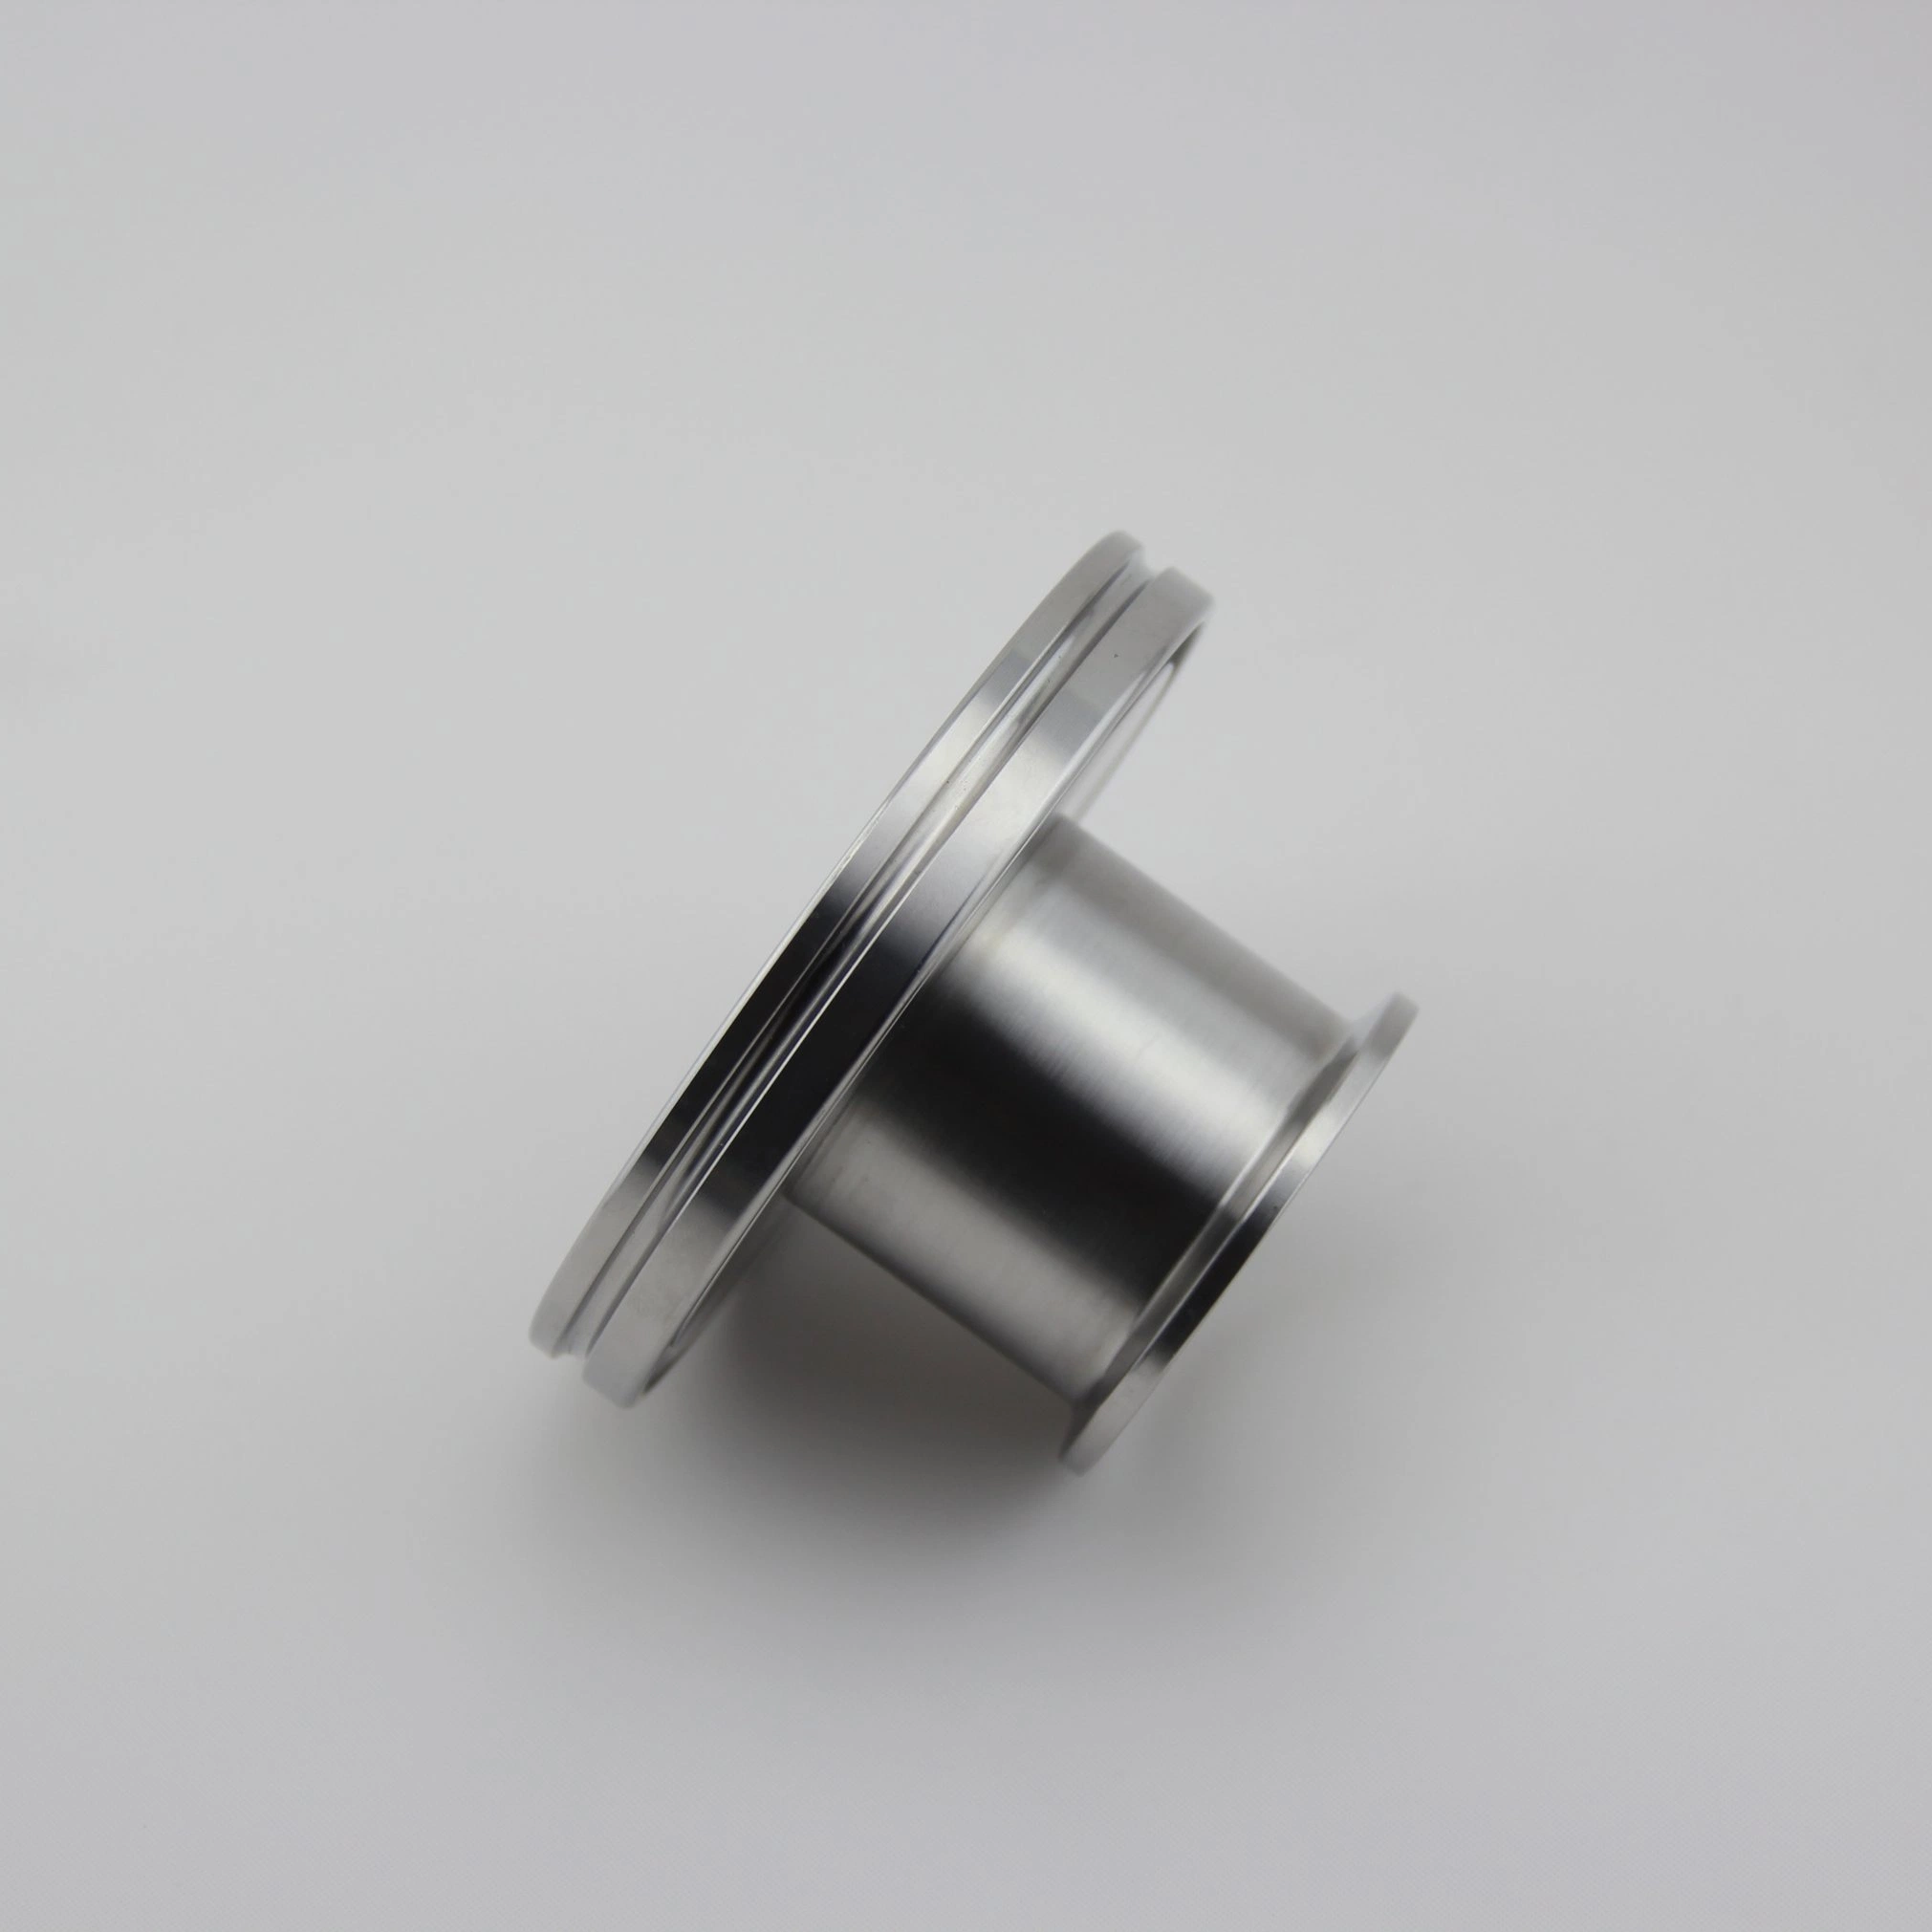 Forged Flange Stainless Steel Vacuum ISO to Kf Fittings Adaptor Straight Reducer